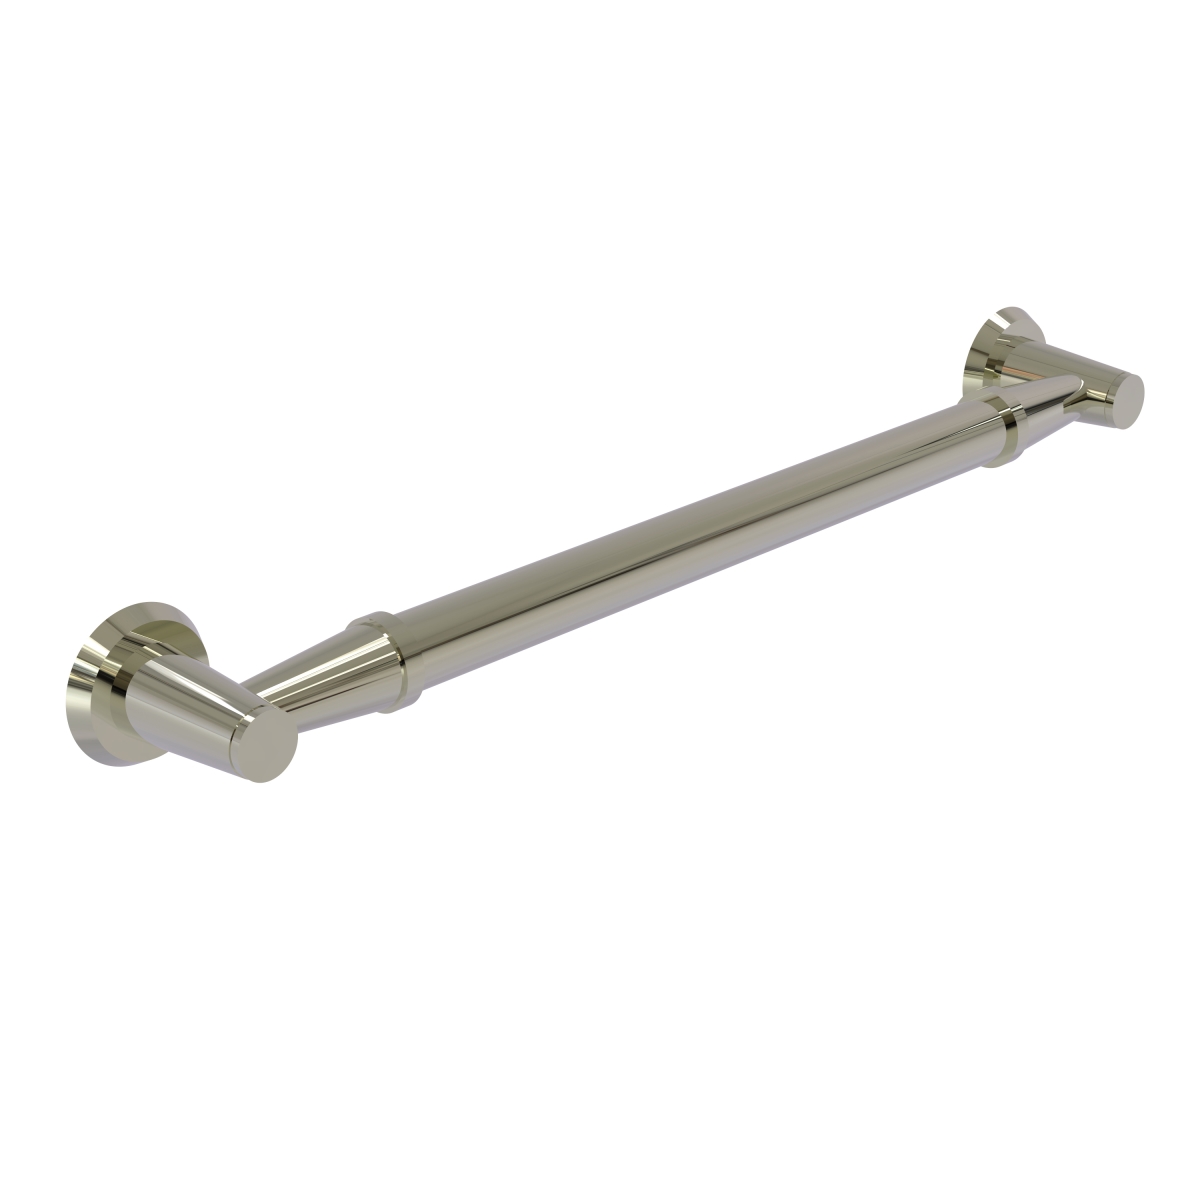 Picture of Allied Brass MD-GRS-16-PNI 16 in. Grab Bar Smooth, Polished Nickel - 3.5 x 18 x 16 in.